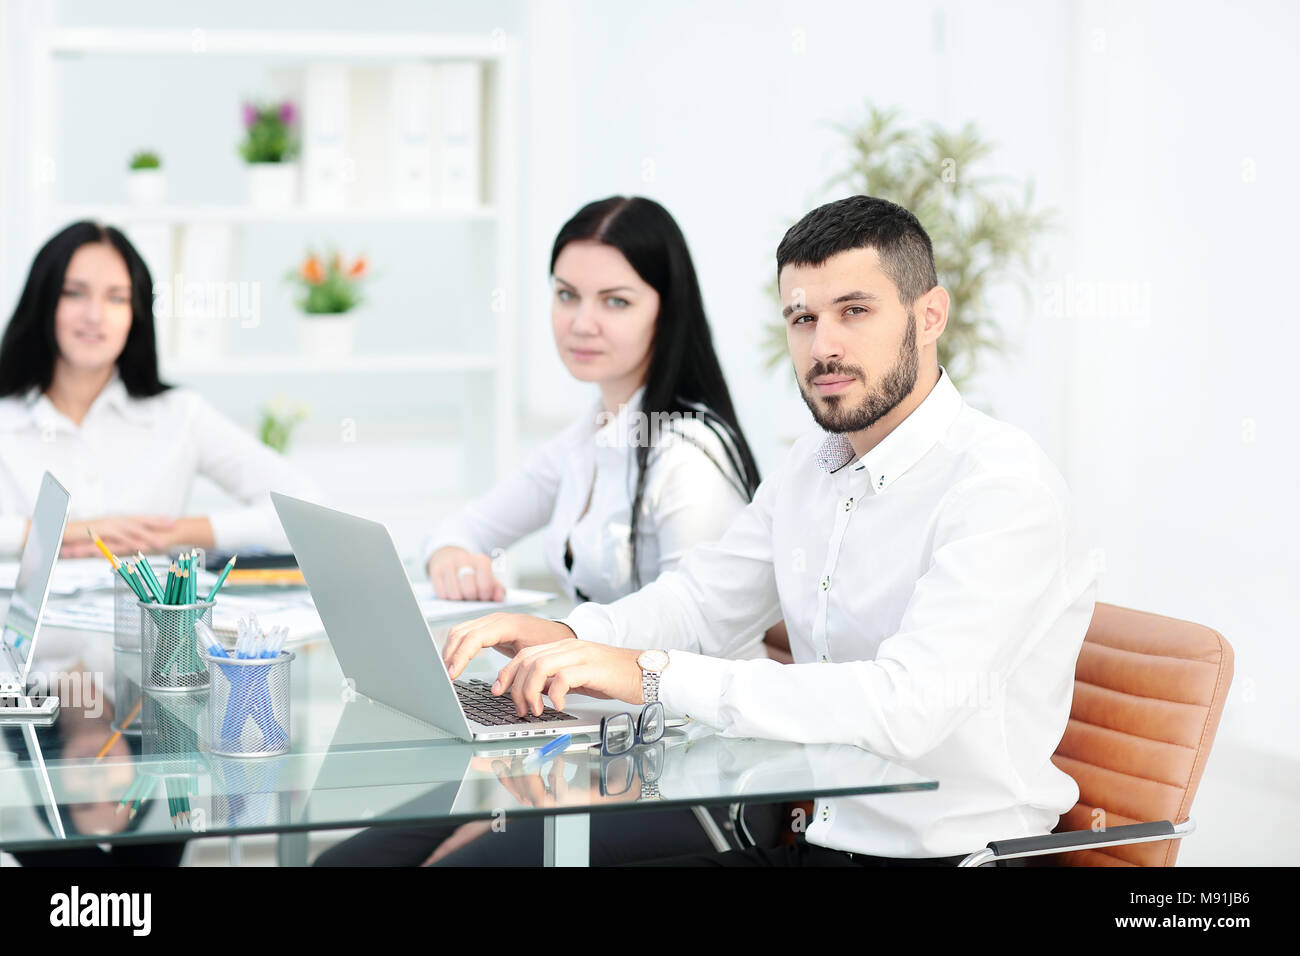 Business People Meeting Communication Discussion Working Office Concept Stock Photo